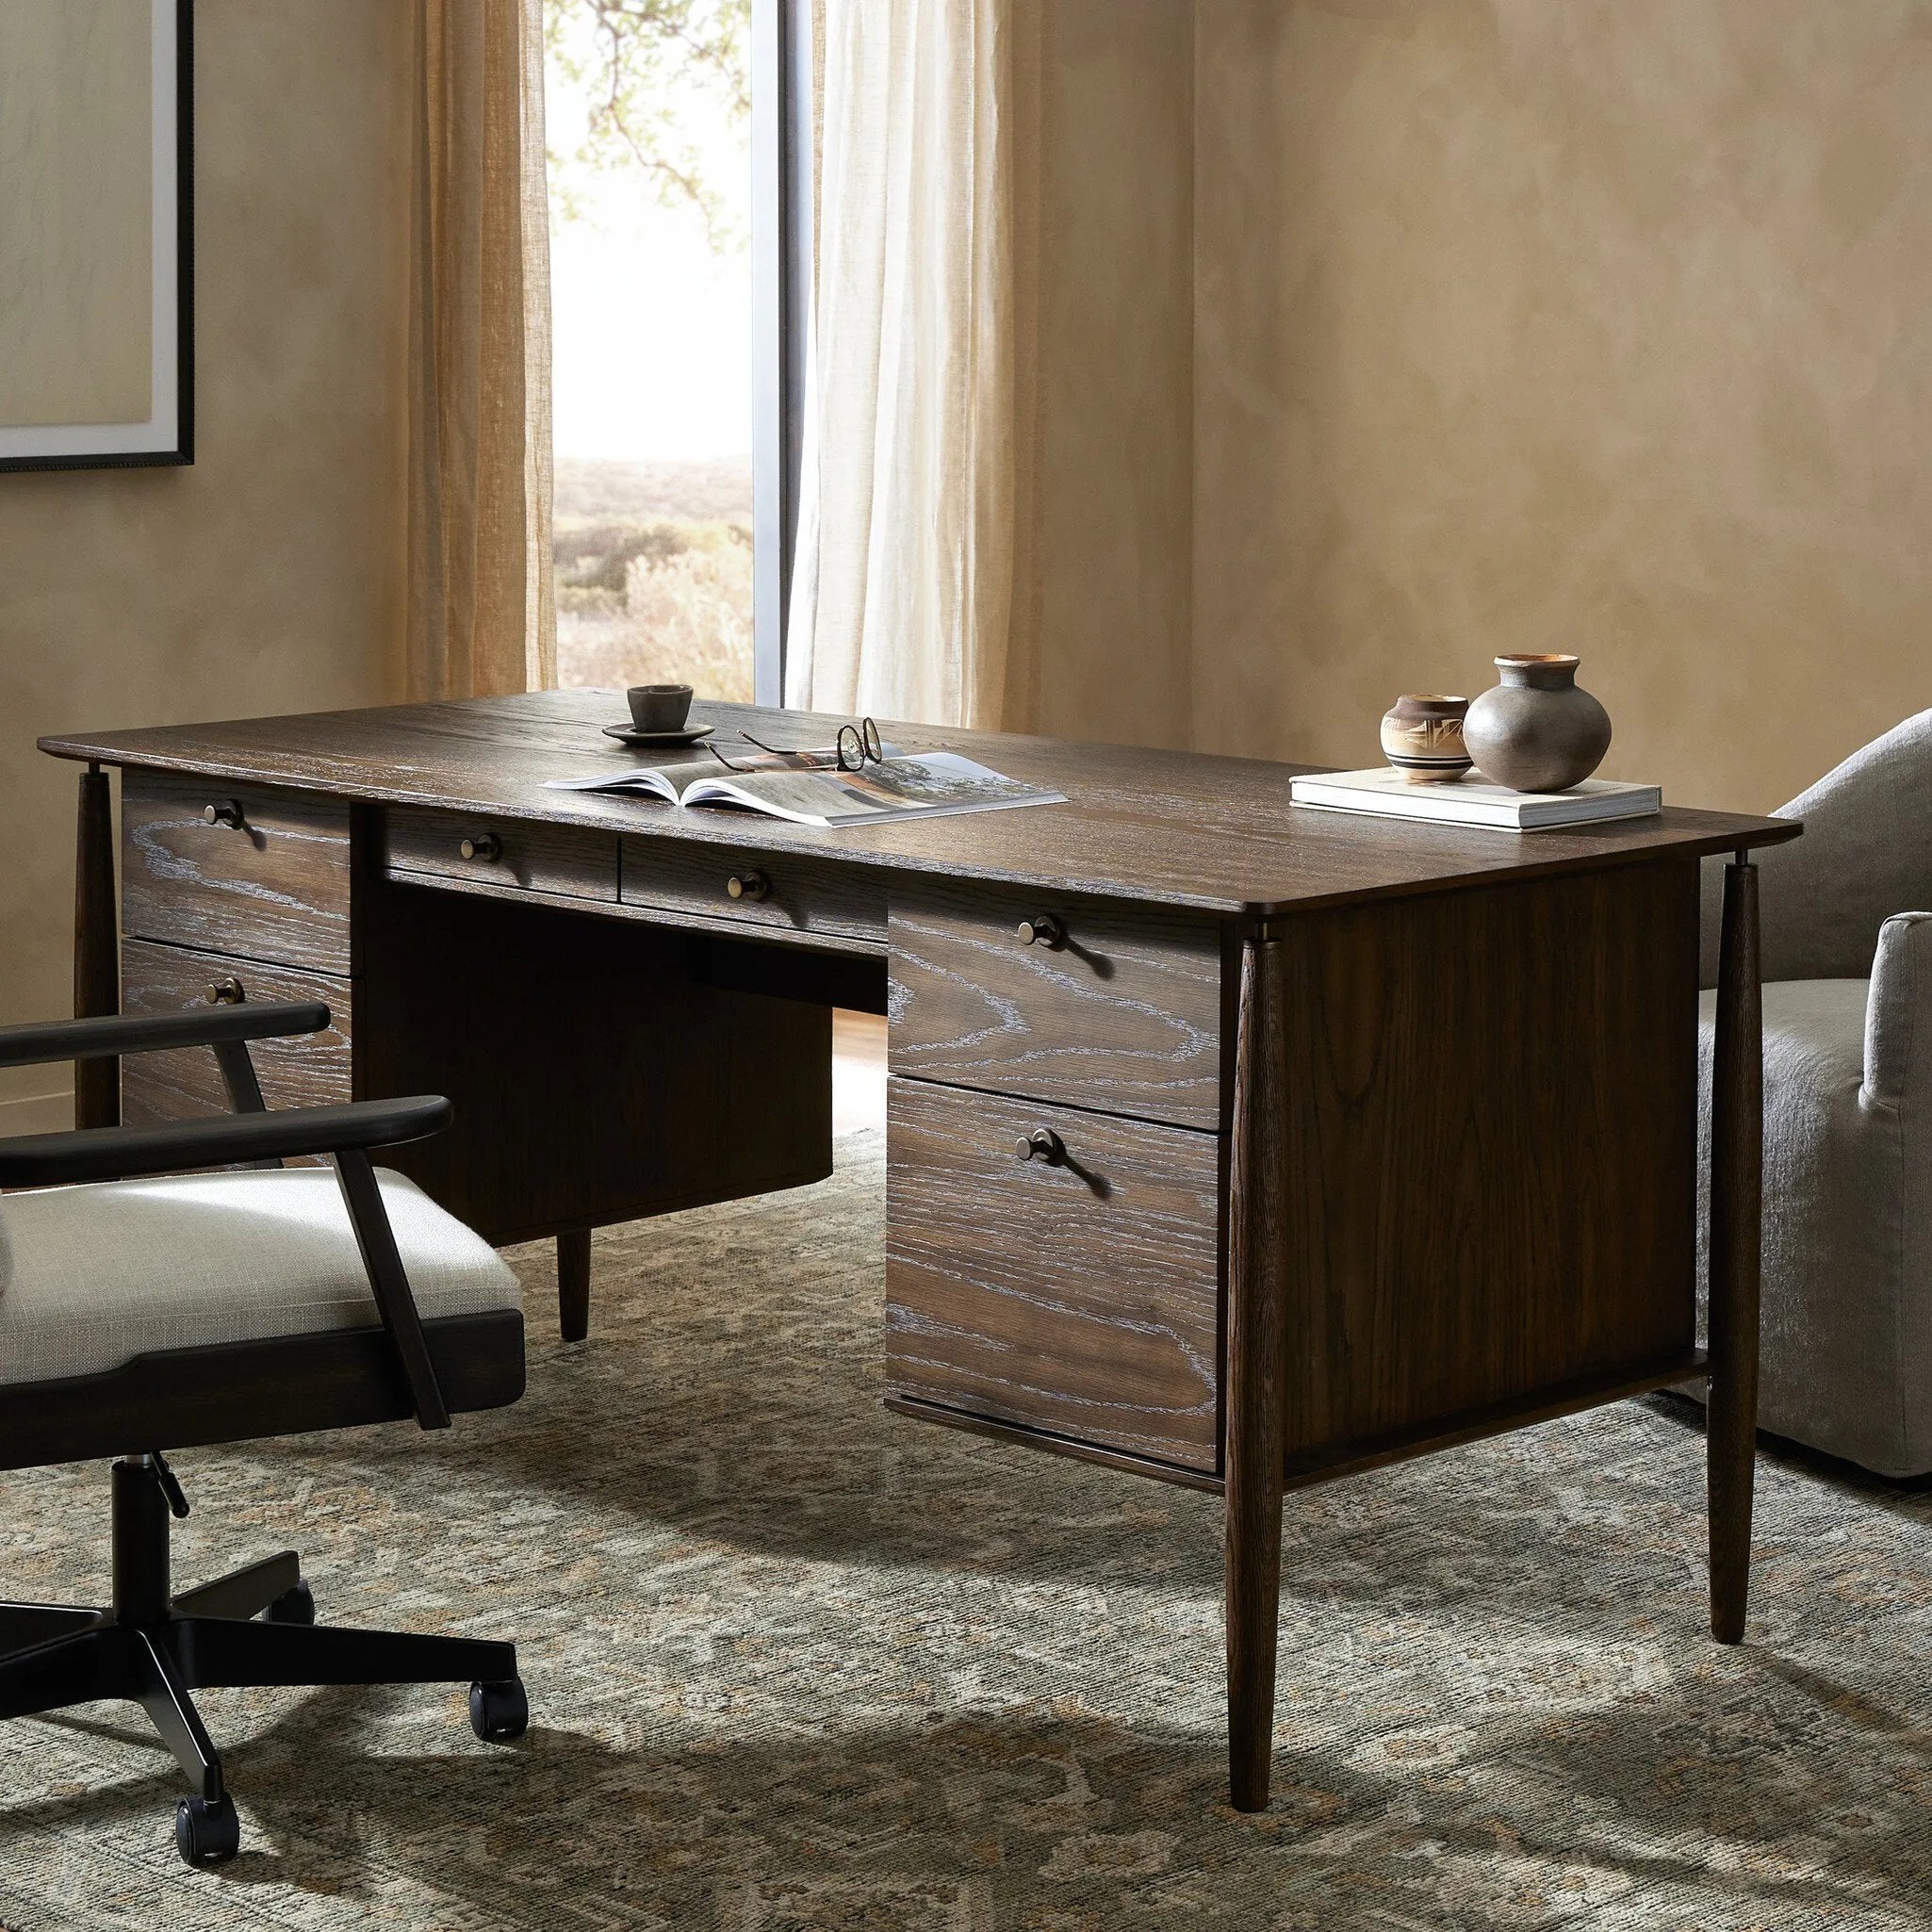 An executive-style desk of aged oak, inspired by European antiques. Turned, cylindrical legs adapt this charming heirloom-inspired piece for the modern home office and beyond.Collection: Haide Amethyst Home provides interior design, new home construction design consulting, vintage area rugs, and lighting in the Monterey metro area.